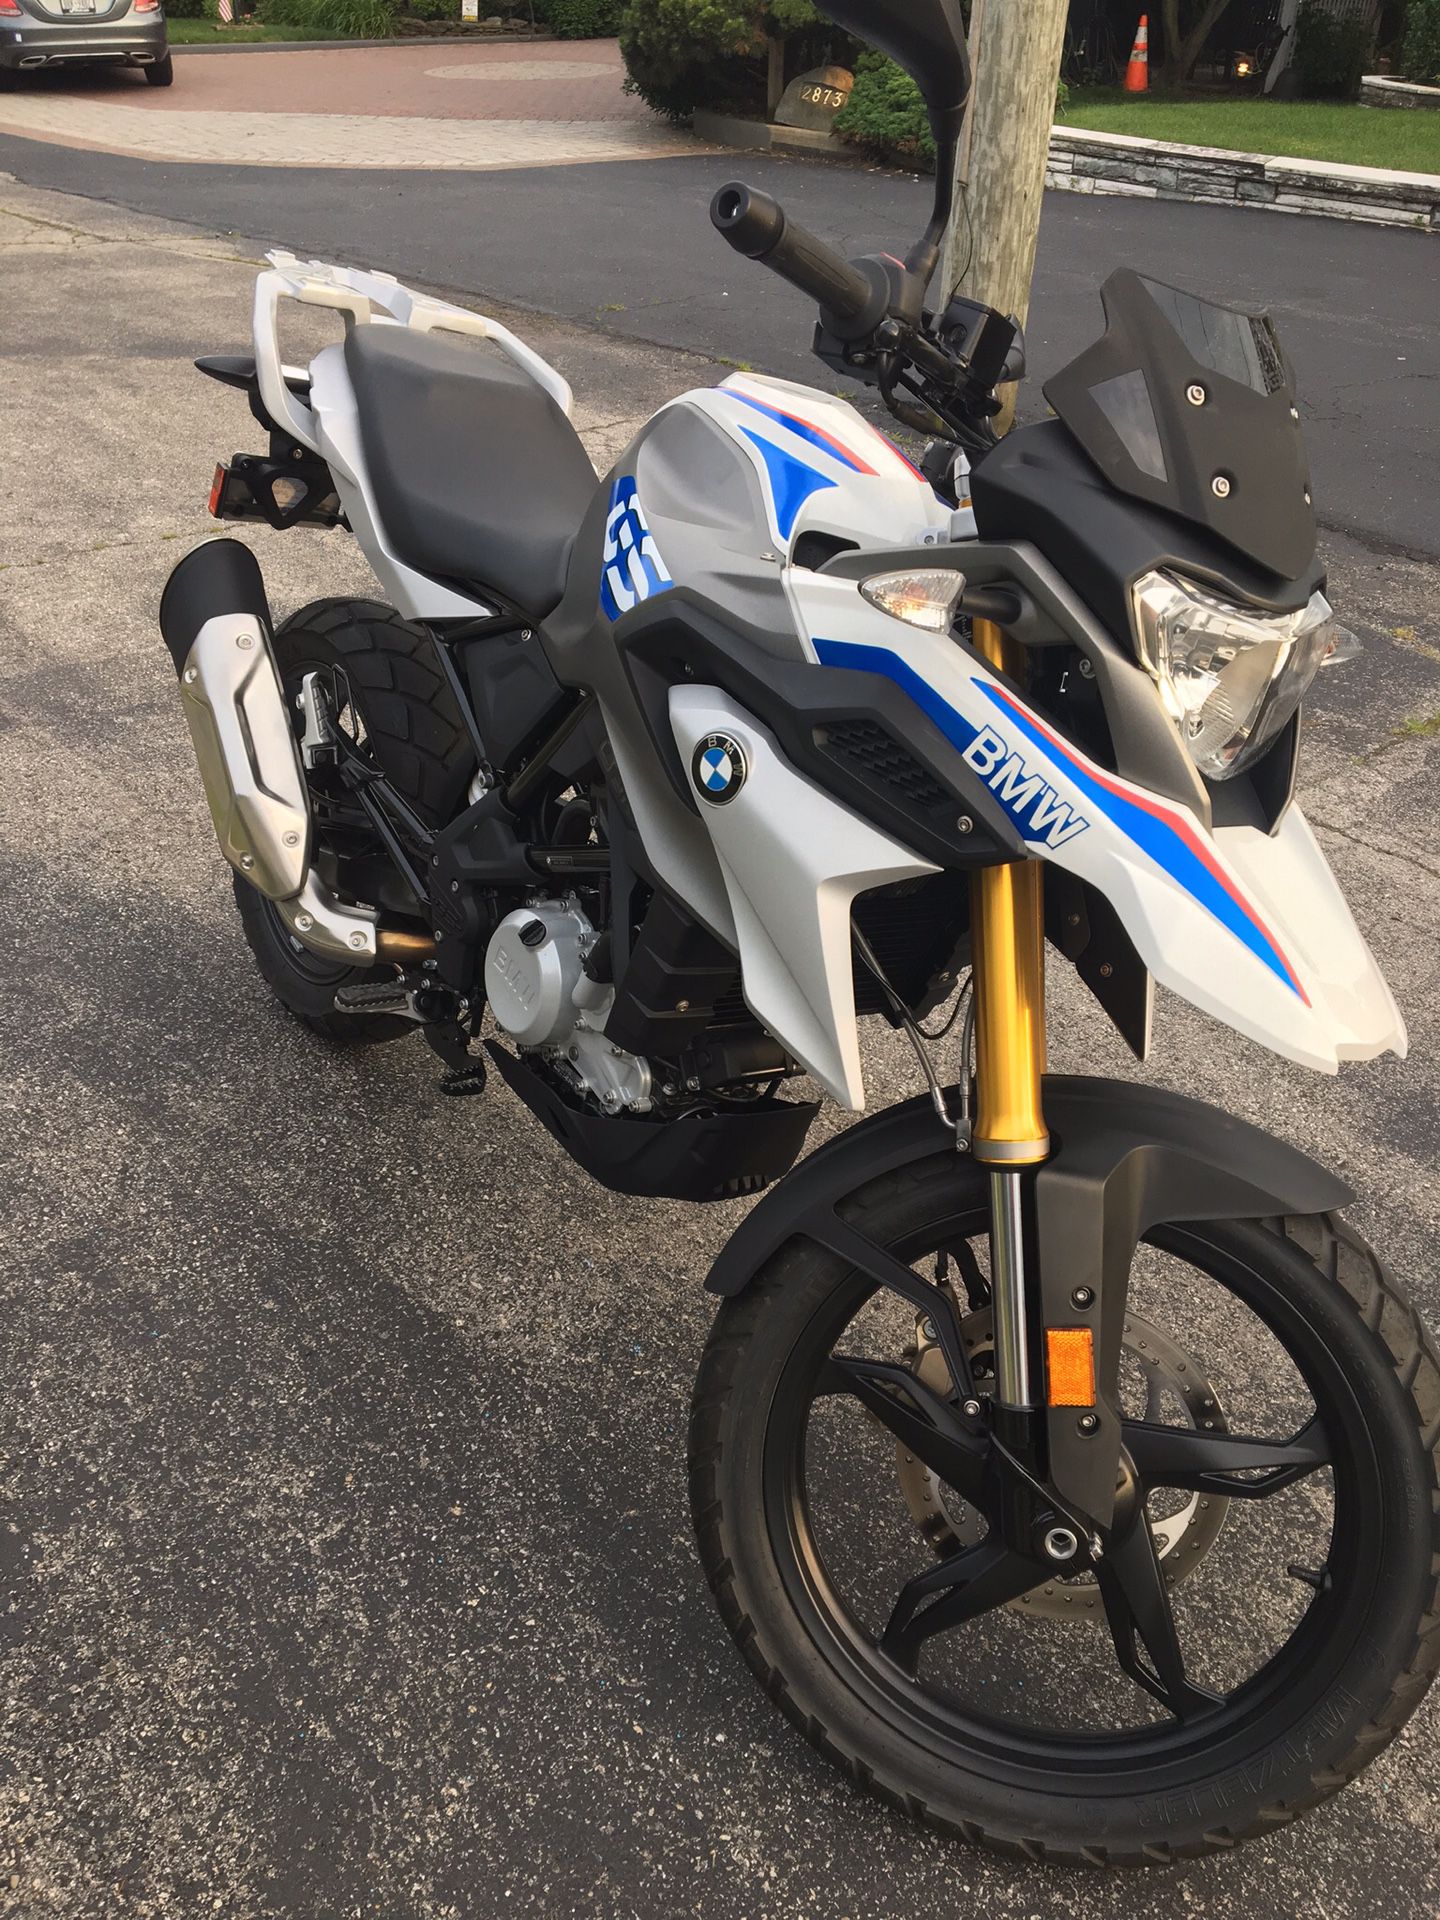 2018 BMW GS 310 Motorcycle *PRICE IN NON-NEGOTIABLE*